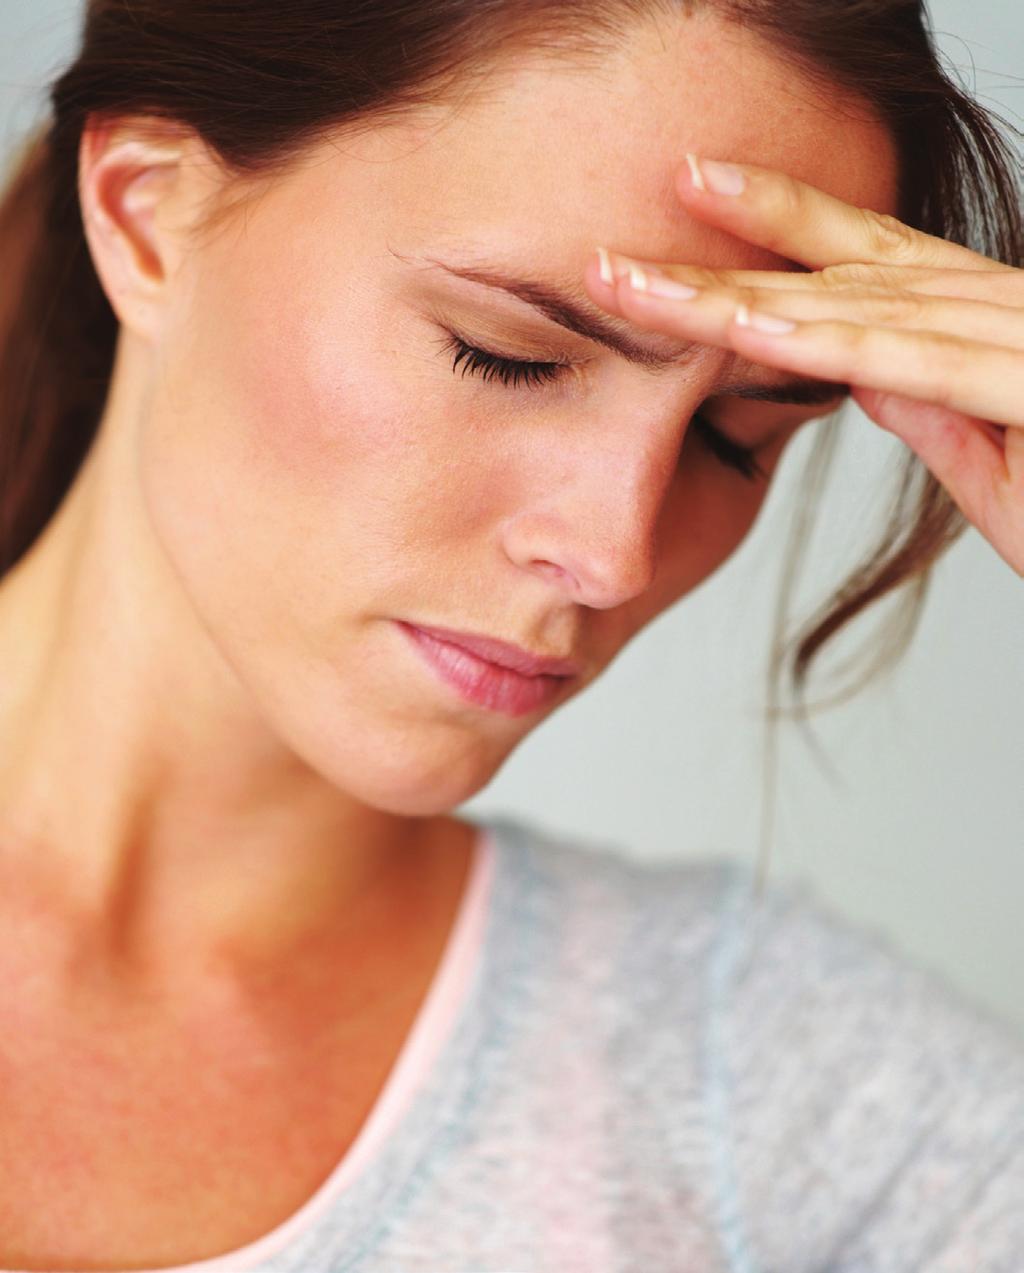 Treating Chronic Migraines with Botox Patients suffering from the debilitating effects of chronic migraines are finding that Botox injections can help reduce the number of episodes and their severity.